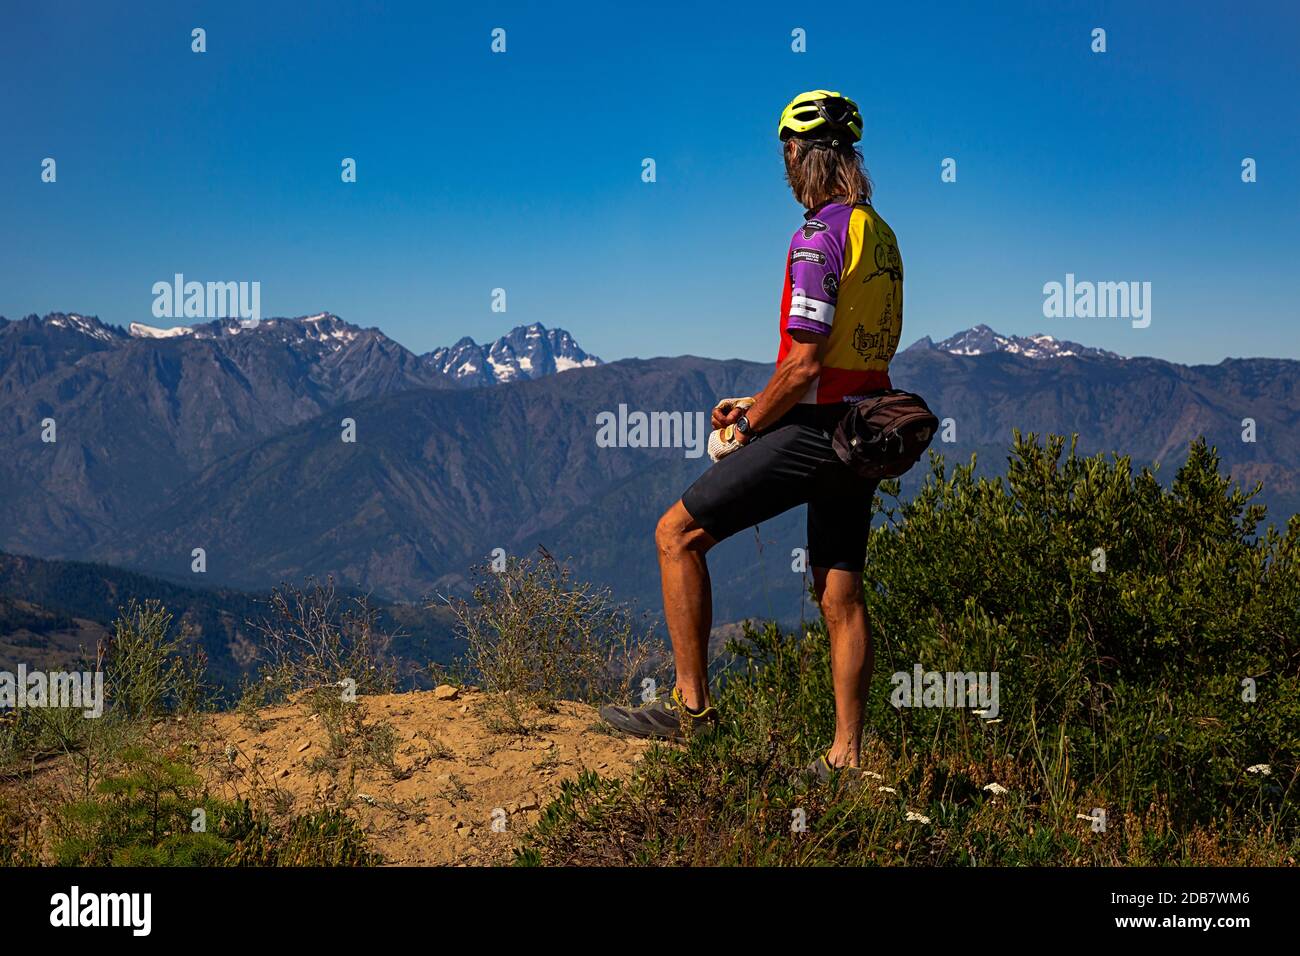 WA18137-00...WASHINGTON - Cyclist checking out the view from turnout along the Chumshick Mountain Road with Mount Stuart and Little Annapurna in view Stock Photo